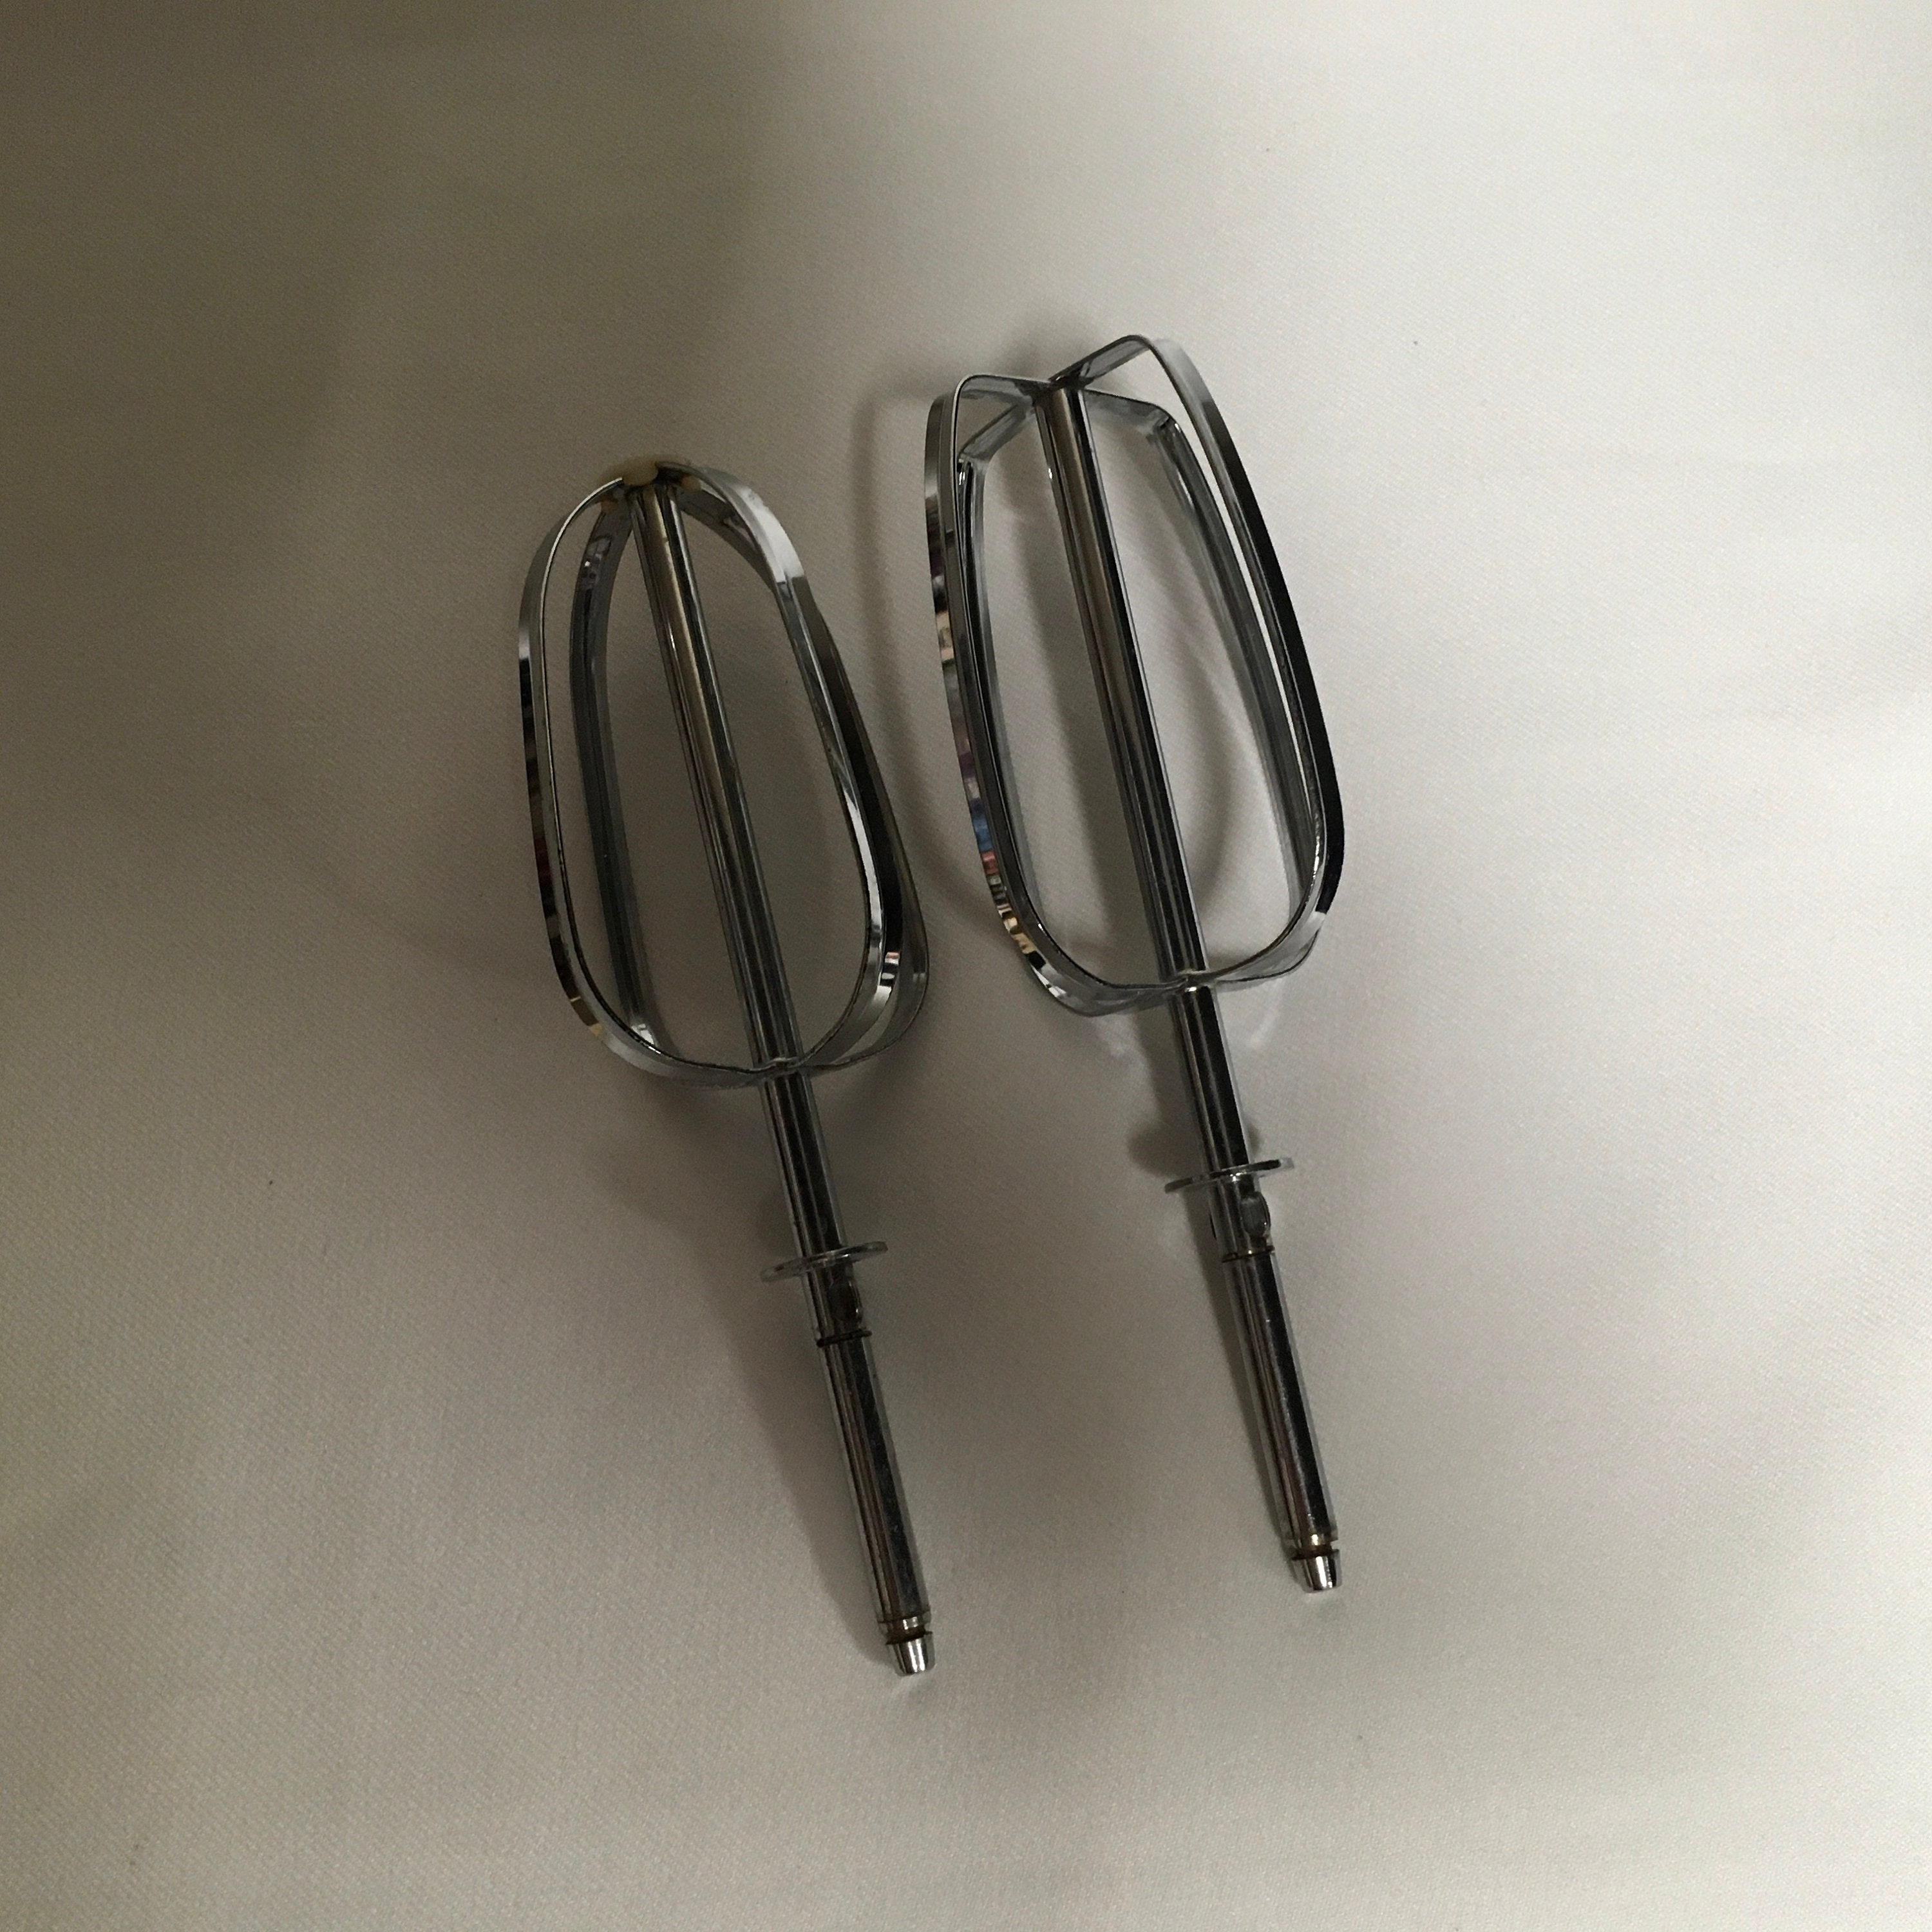  ANTOBLE Replacement Beaters for Sunbeam Mixmaster